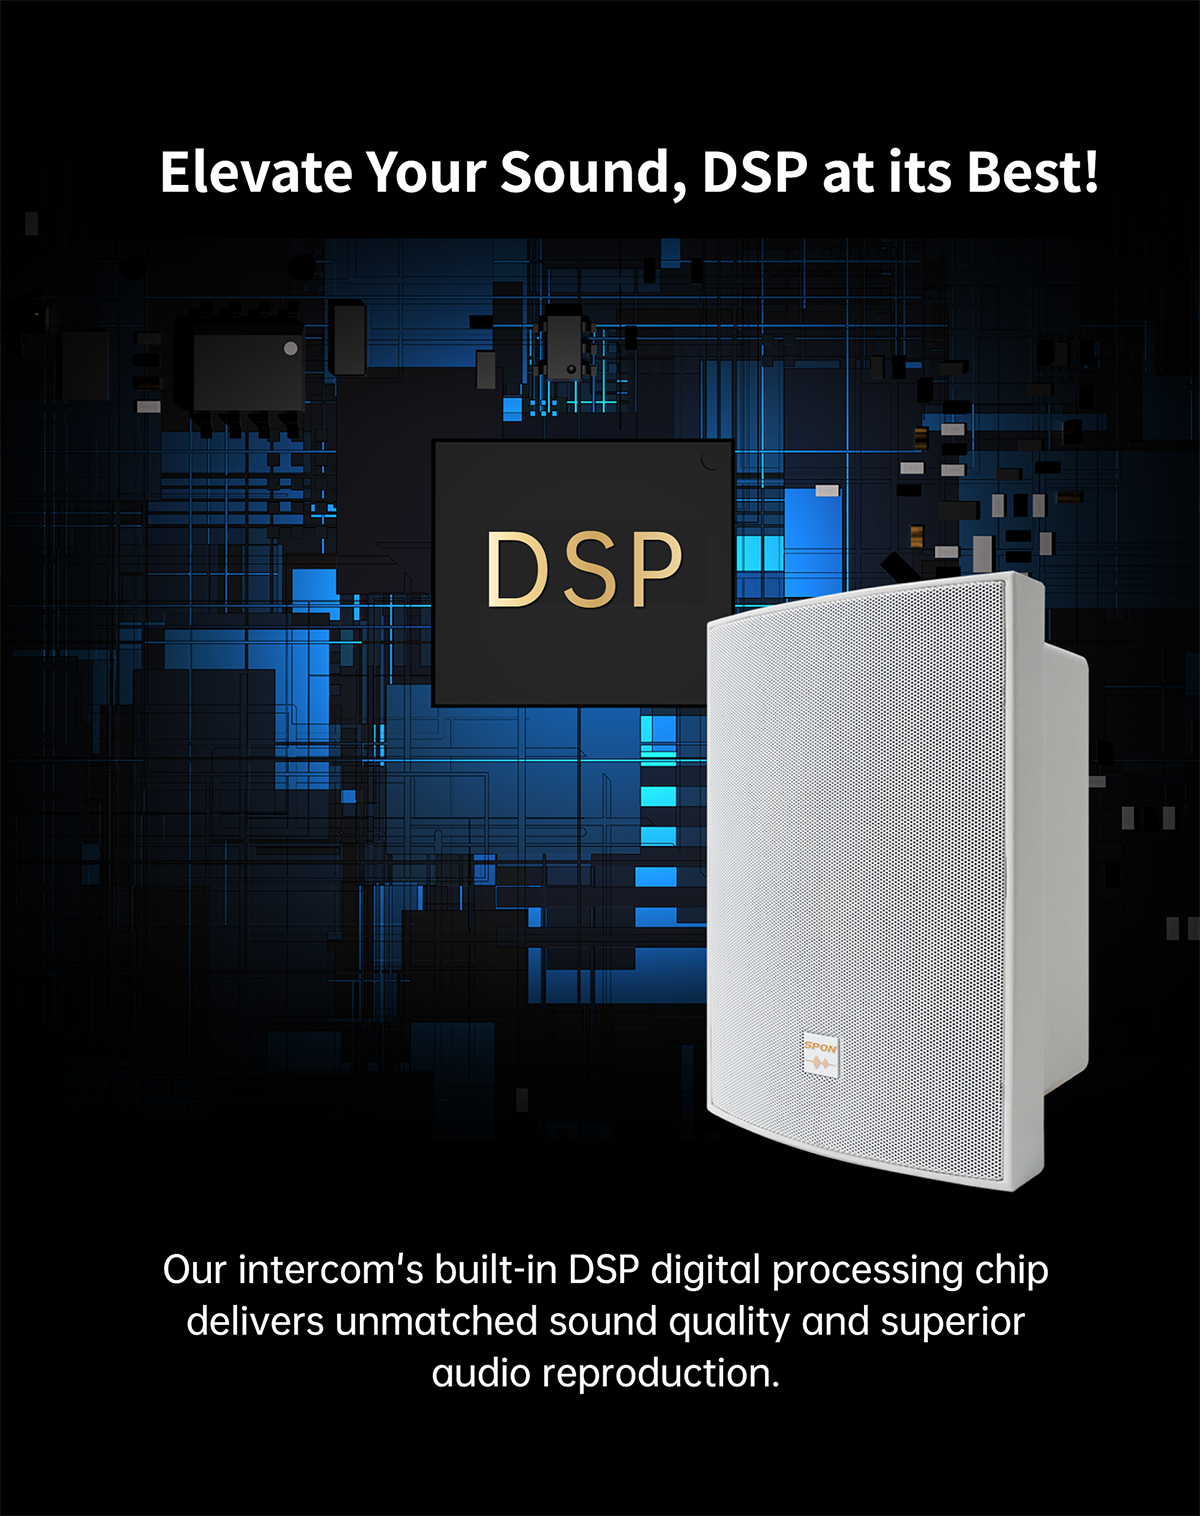 This VoIP Speaker with DSP Chip to elevate the sound effect